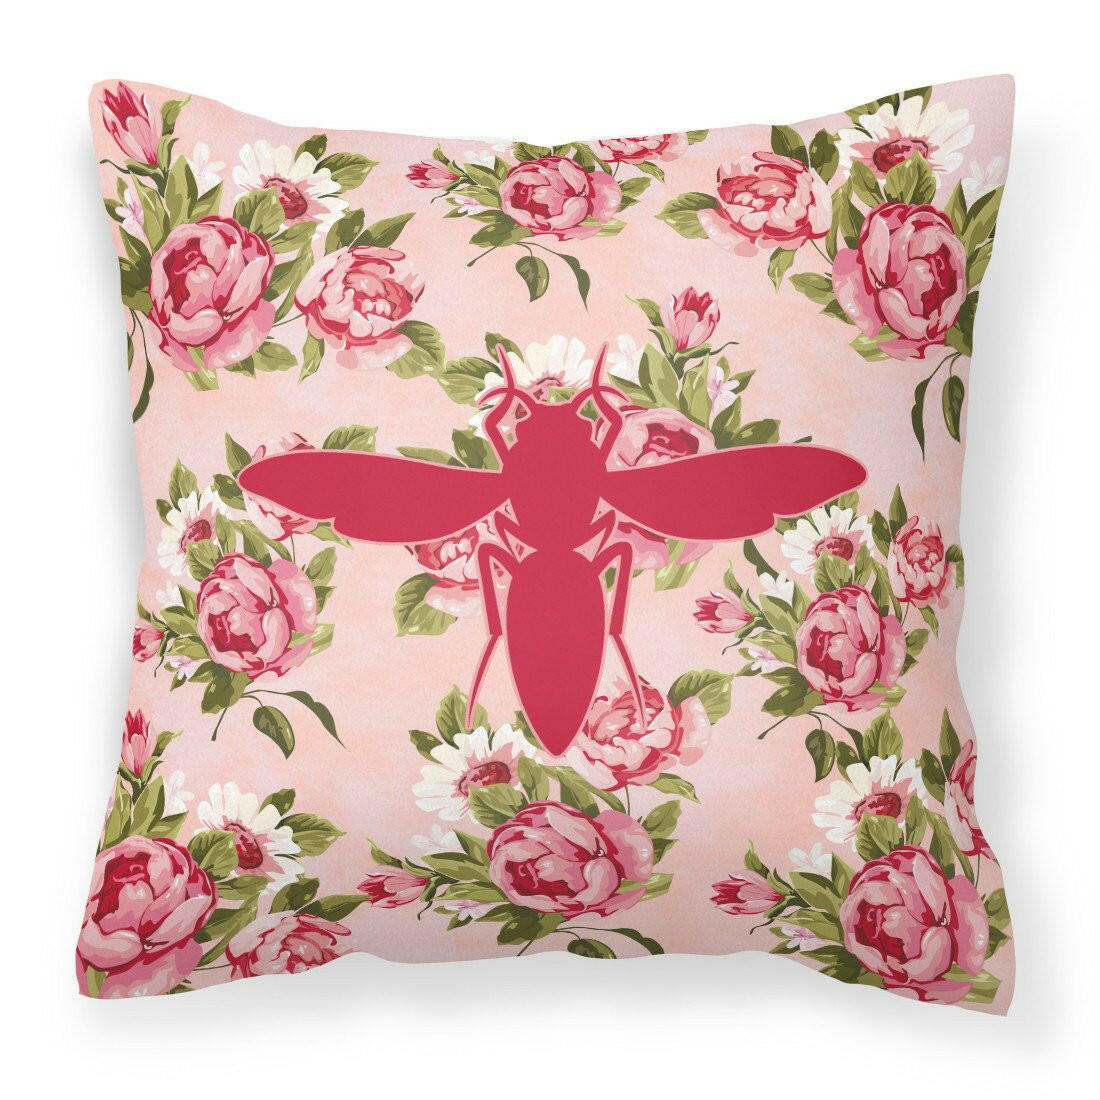 Yellow Jacket Shabby Chic Pink Roses  Fabric Decorative Pillow BB1053-RS-PK-PW1414 - the-store.com